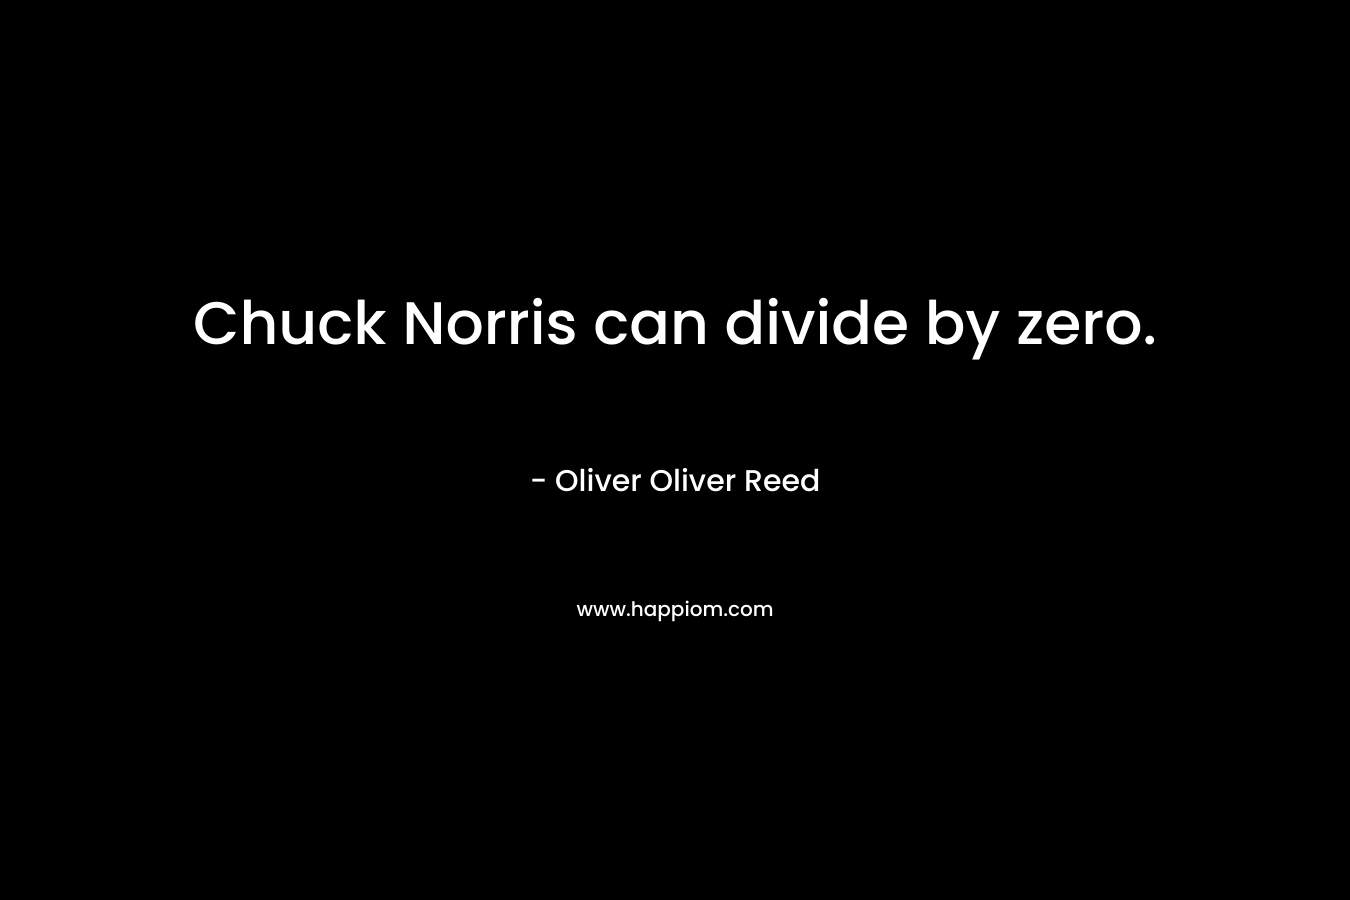 Chuck Norris can divide by zero. – Oliver Oliver Reed